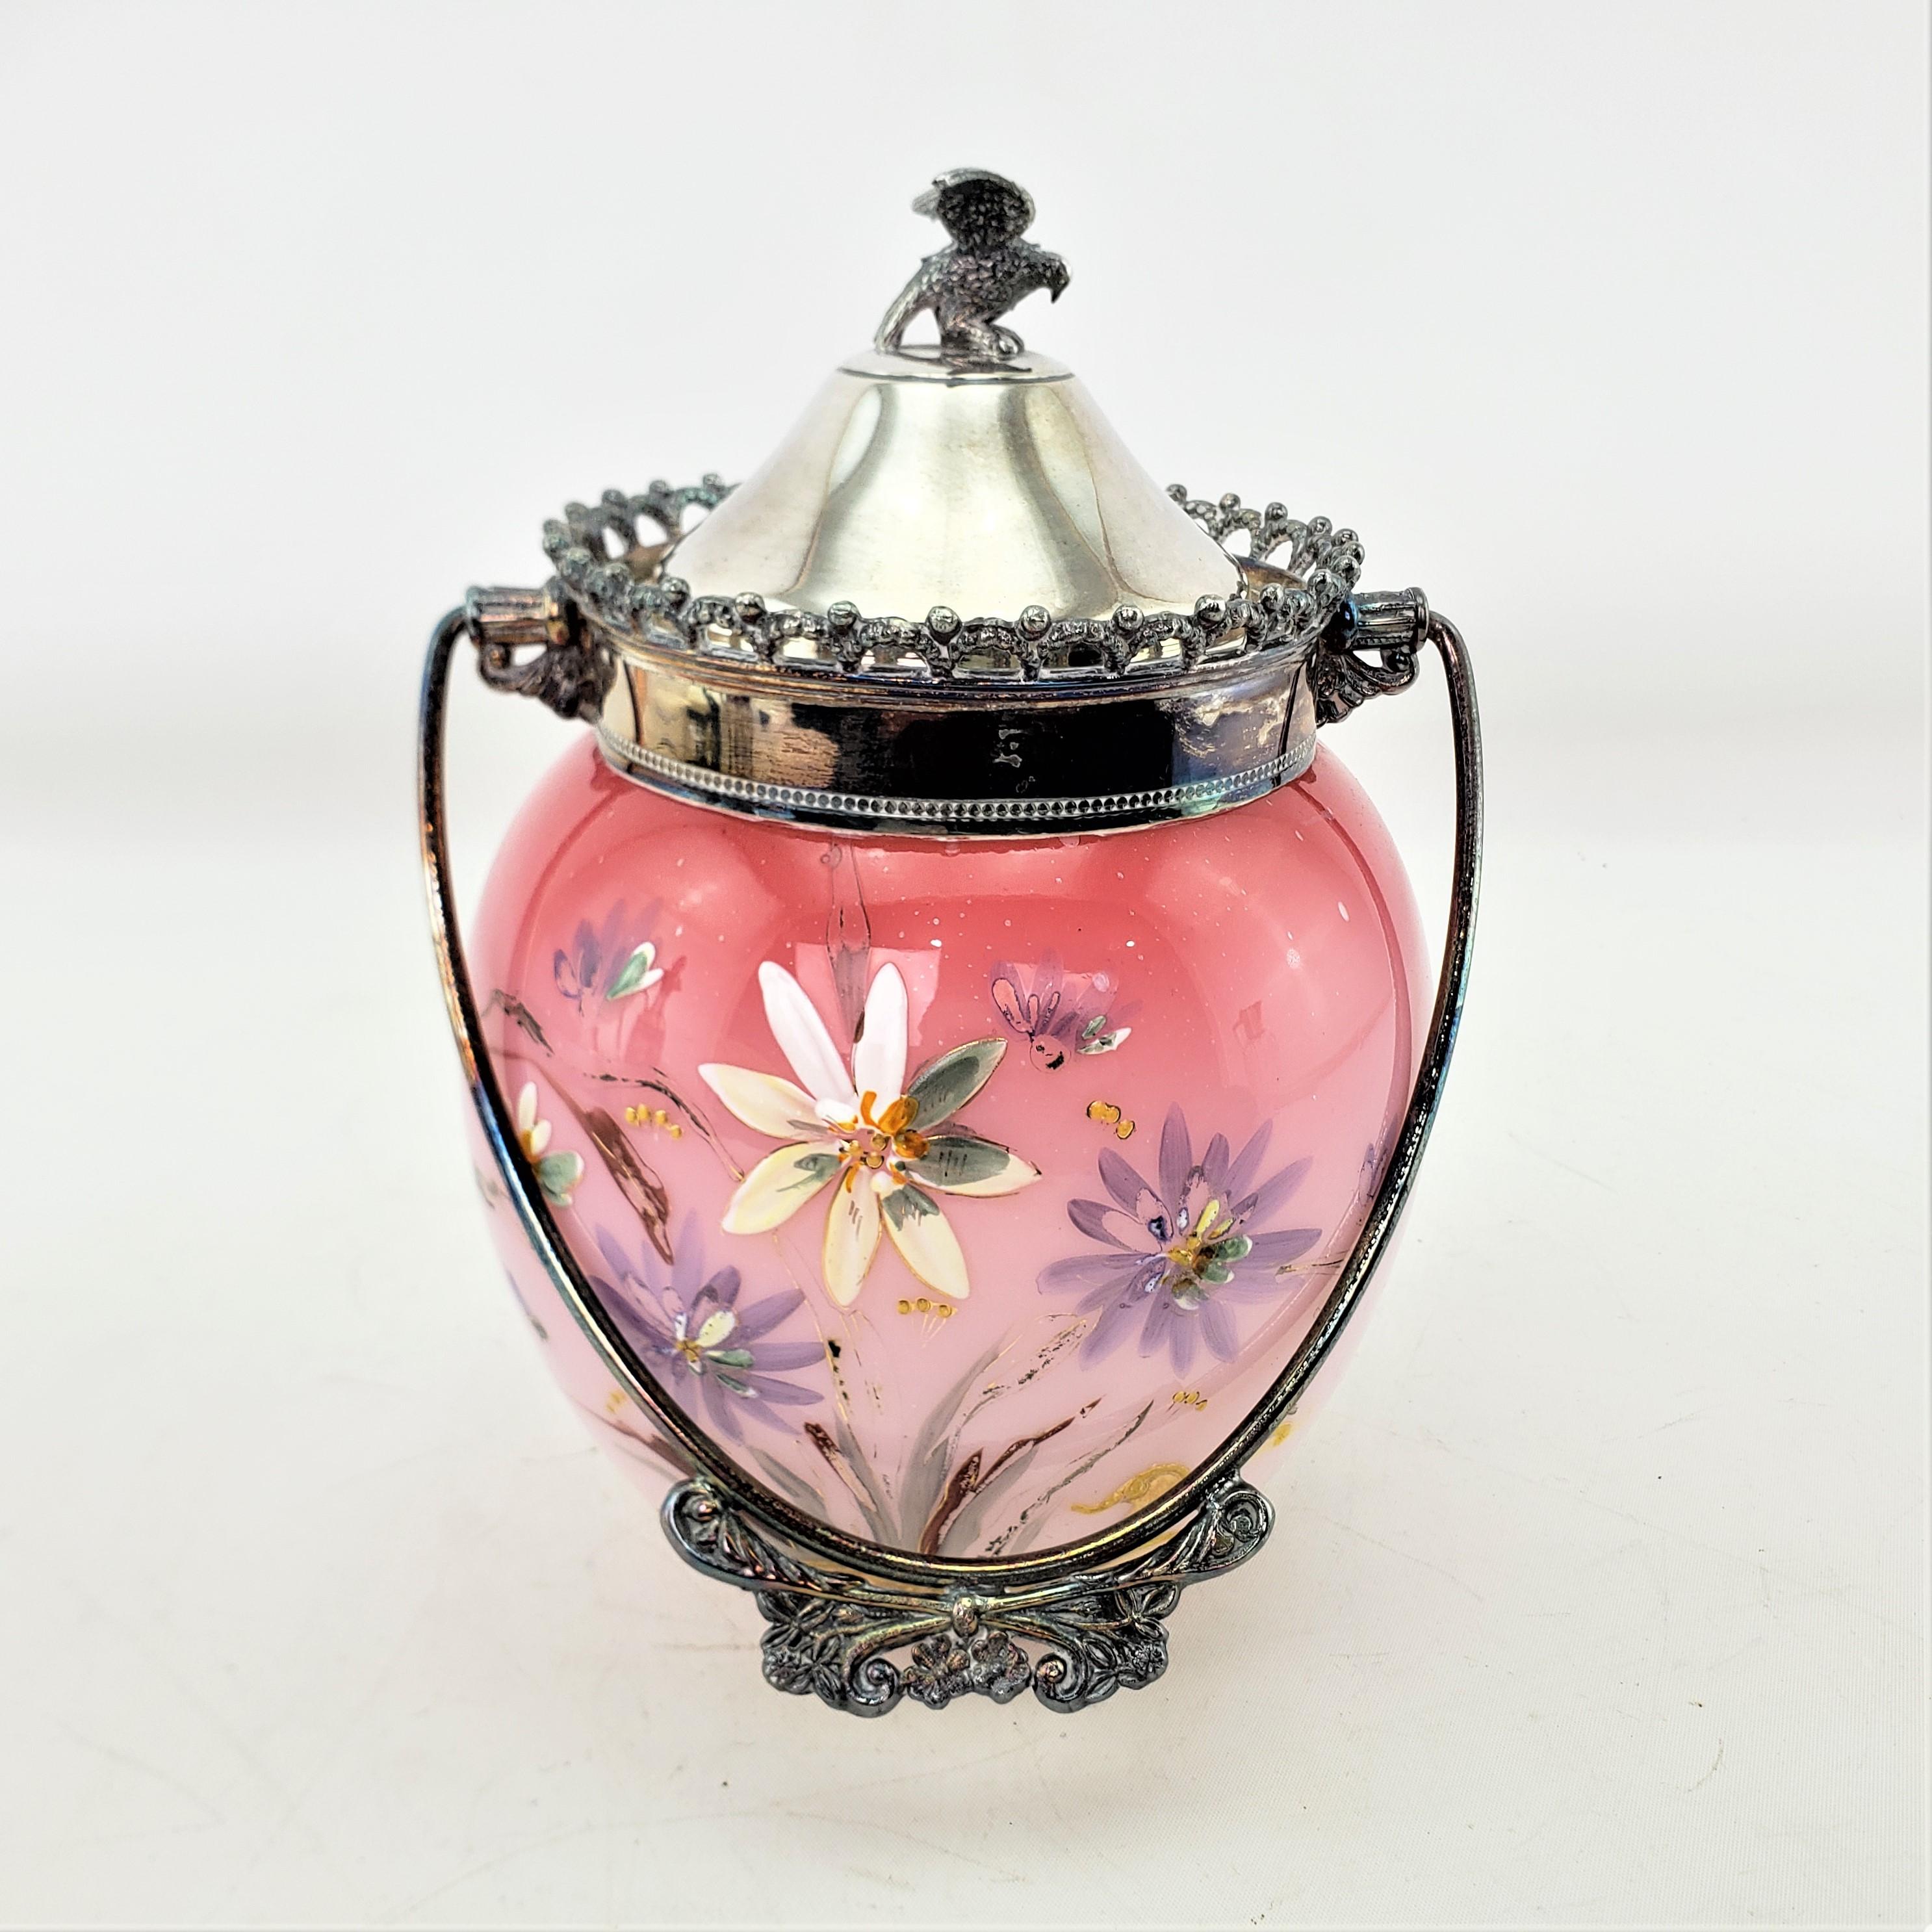 This antique biscuit barrel is unsigned, but presumed to have originated from England and date to approximately 1880 and done in the period Victorian style. The body of the barrel is done with a cranberry and cream artglass with hand-painted flowers